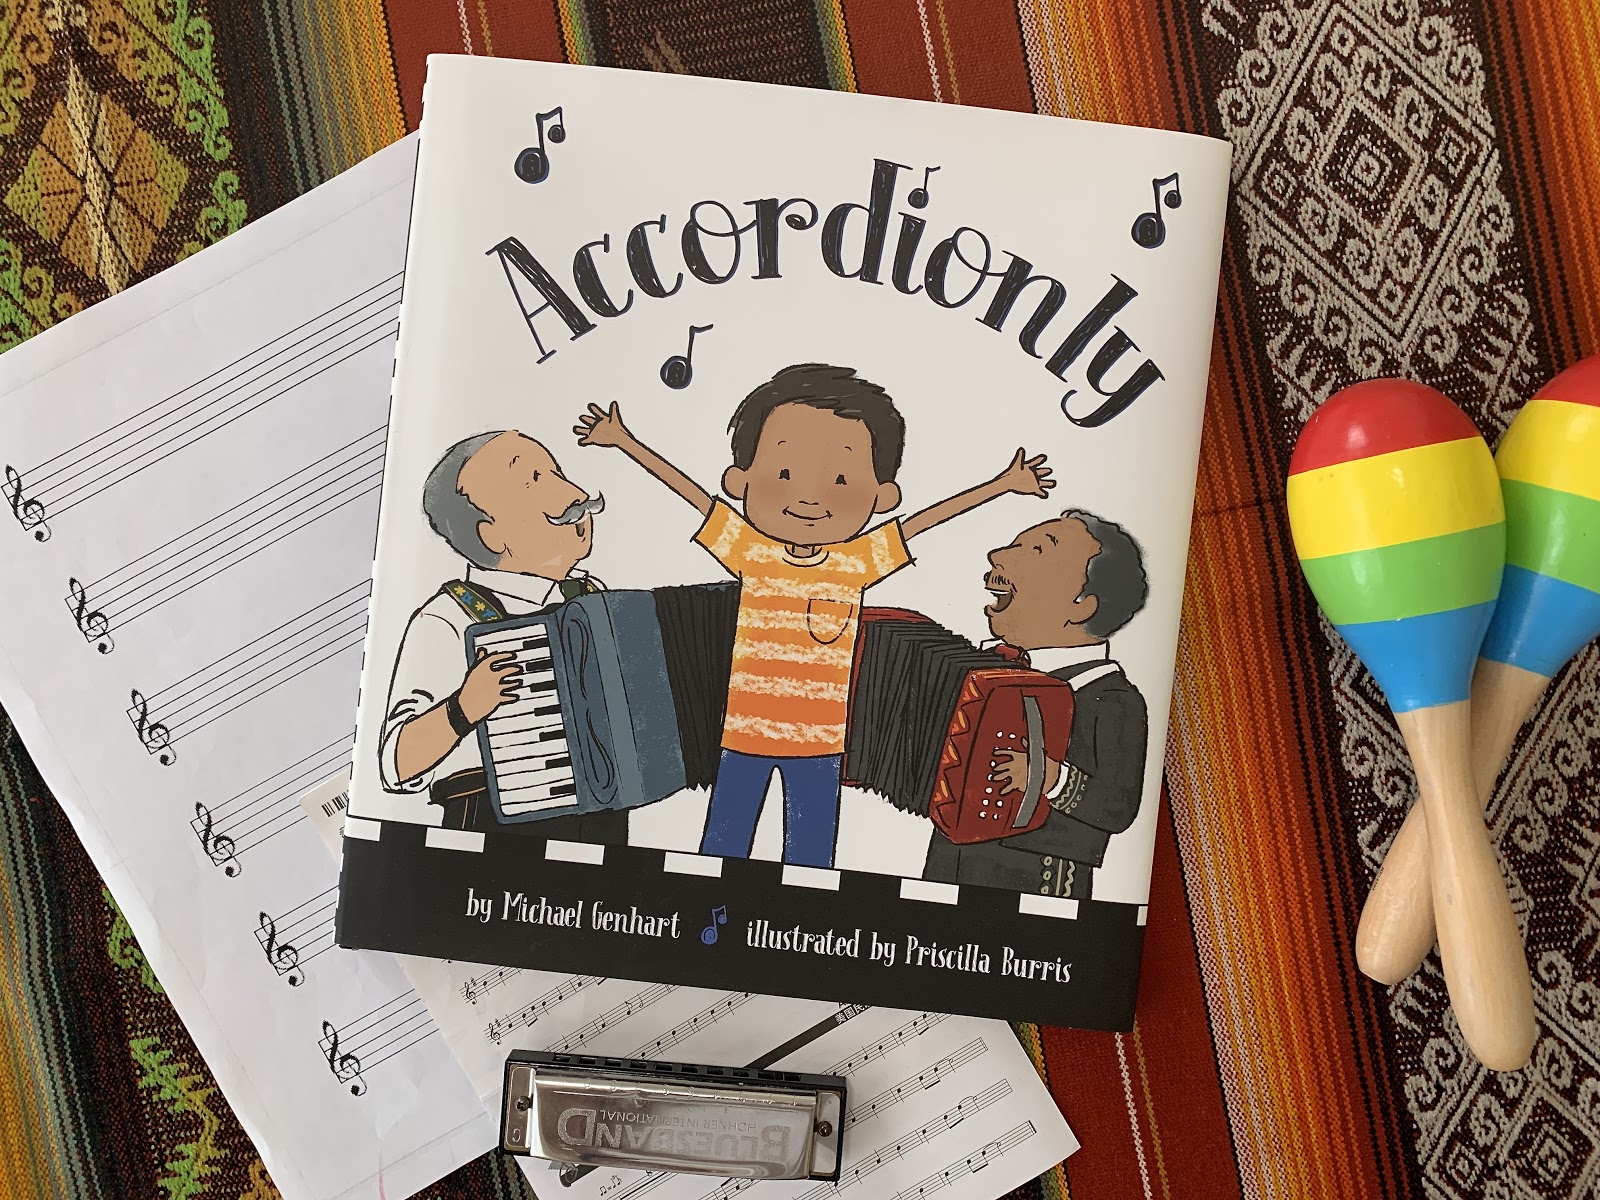 BOOK REVIEW: ‘Accordionly’ by Michael Genhart & Priscilla Burris